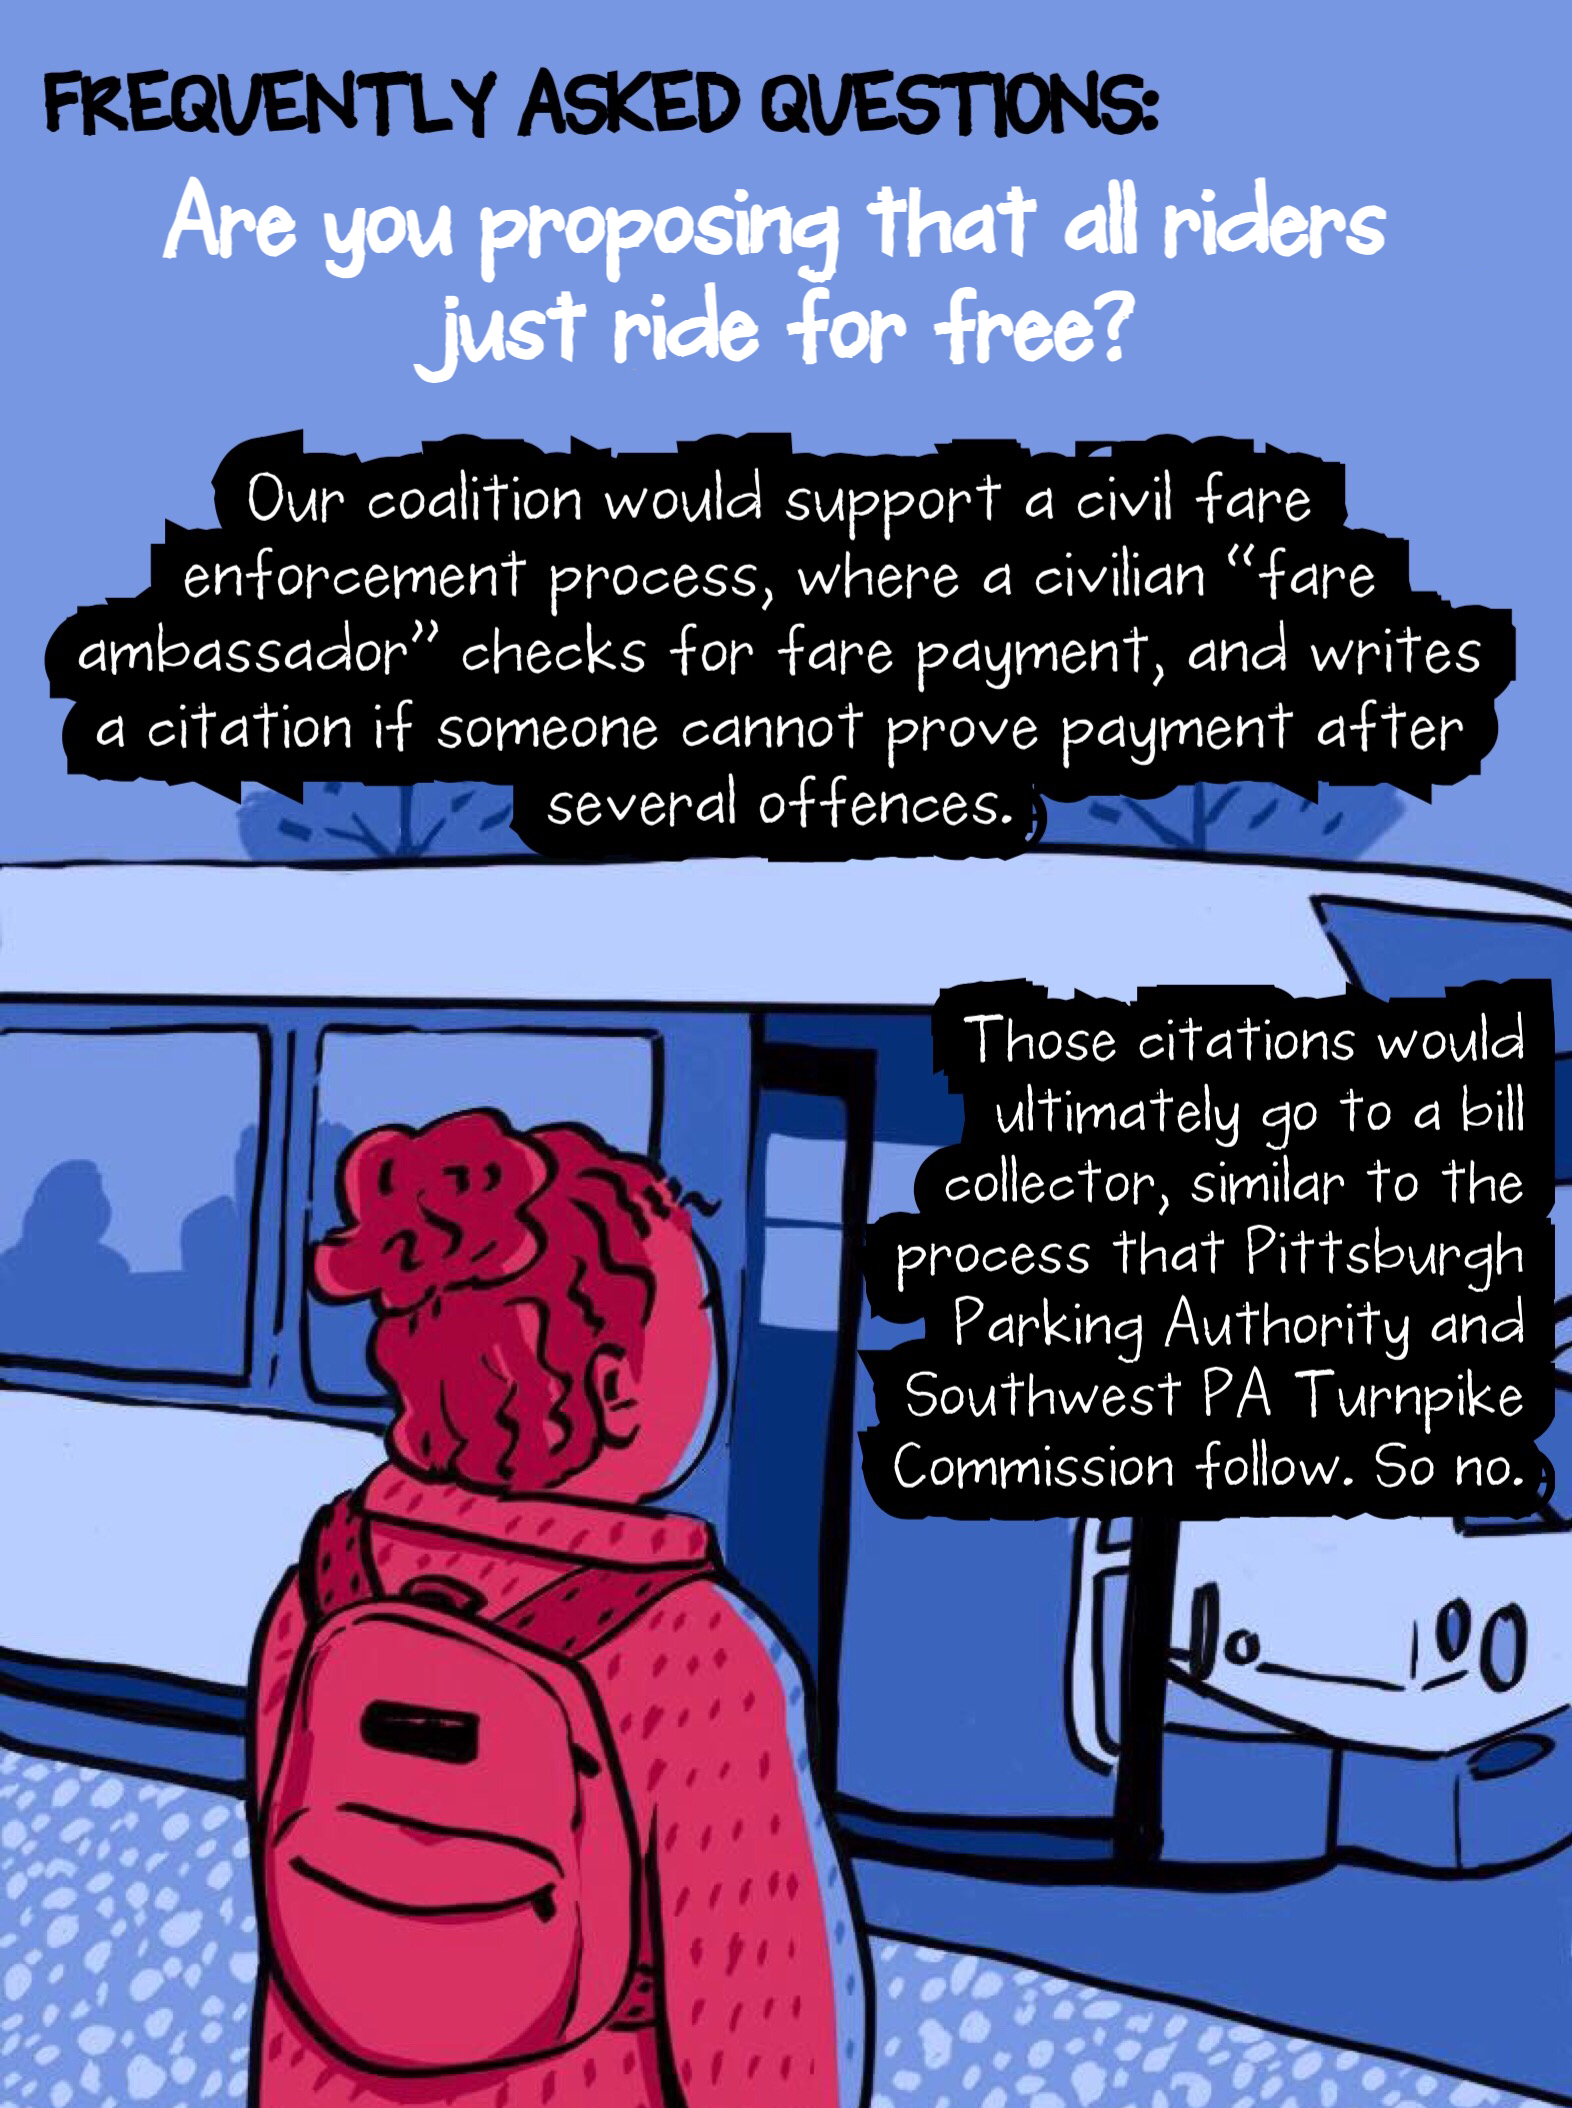 are you proposing that all riders just ride for free - FAQ about Port Authority's Proposed "Proof of Payment" Fare Enforcement